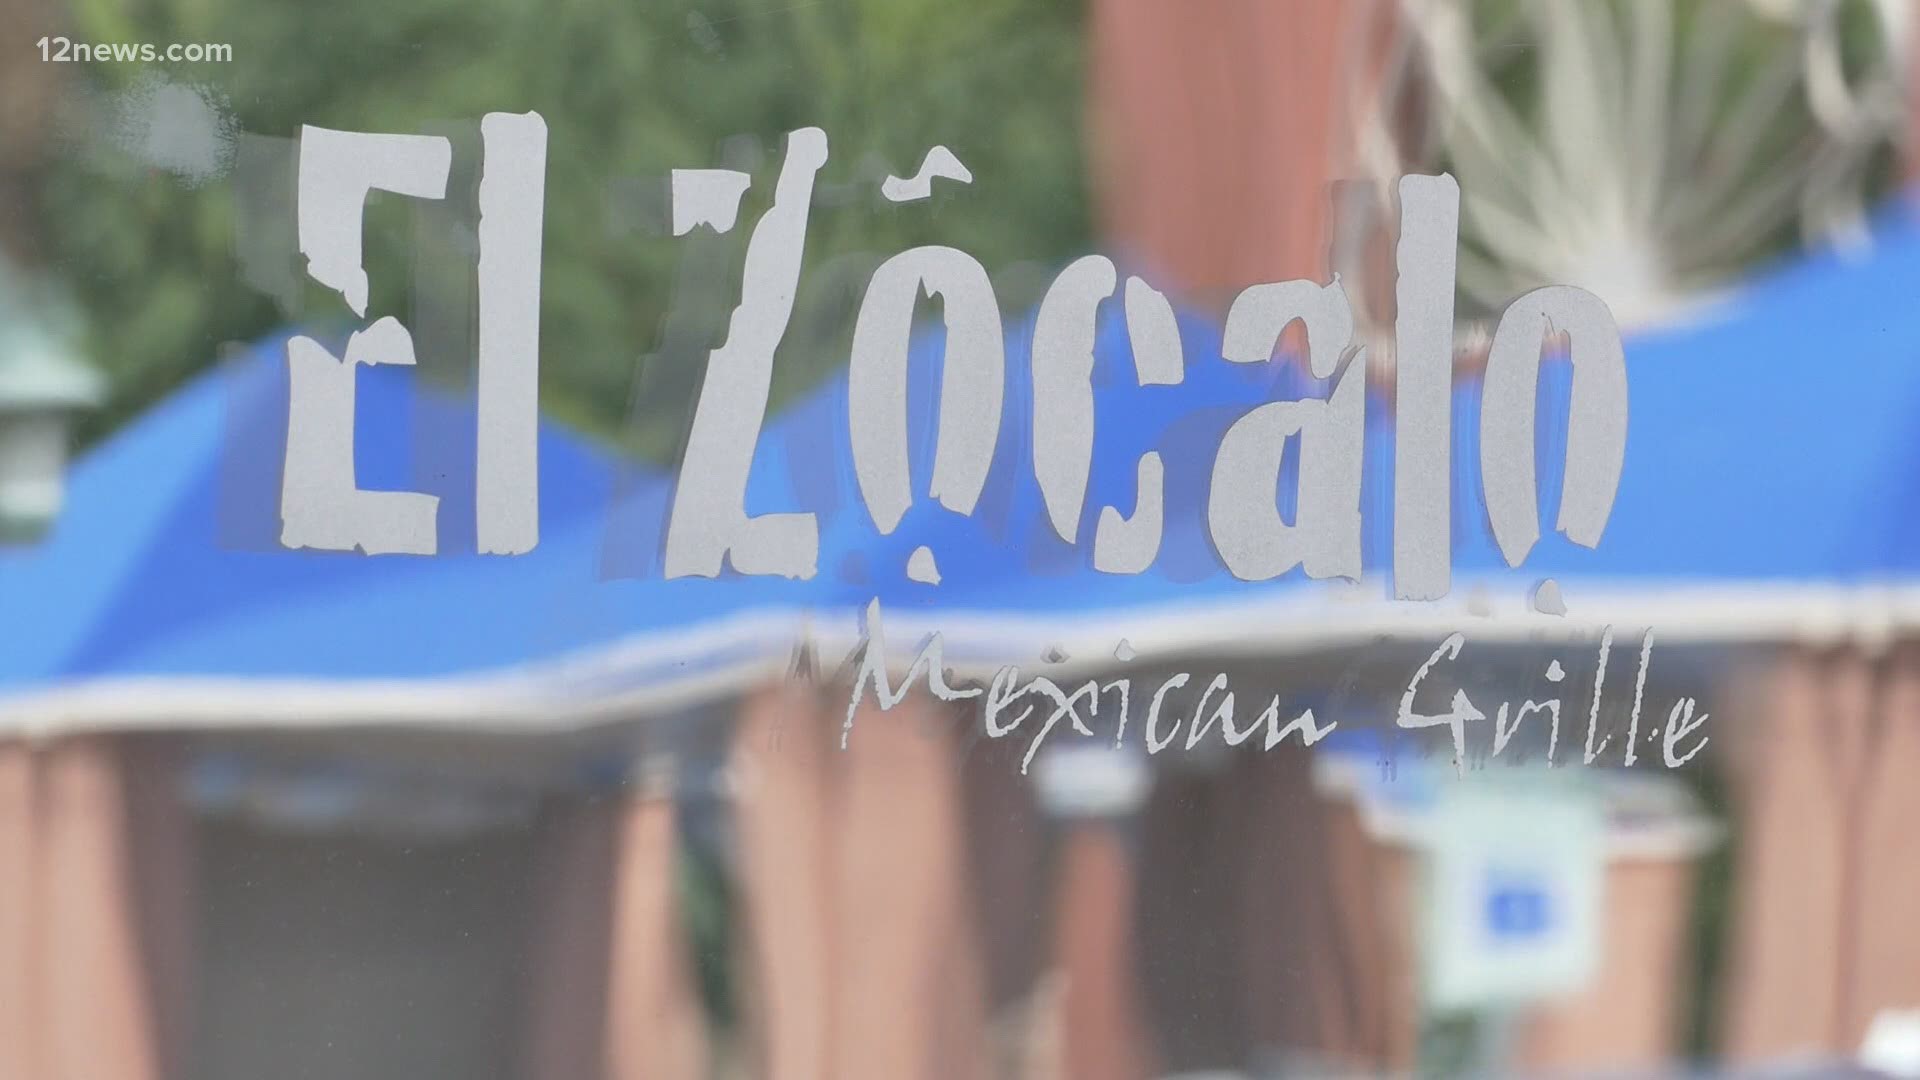 For more than 20 years El Zocalo in Chandler was the "great meeting place". Due to pandemic, however, the restaurant's owner says it won't be reopening.